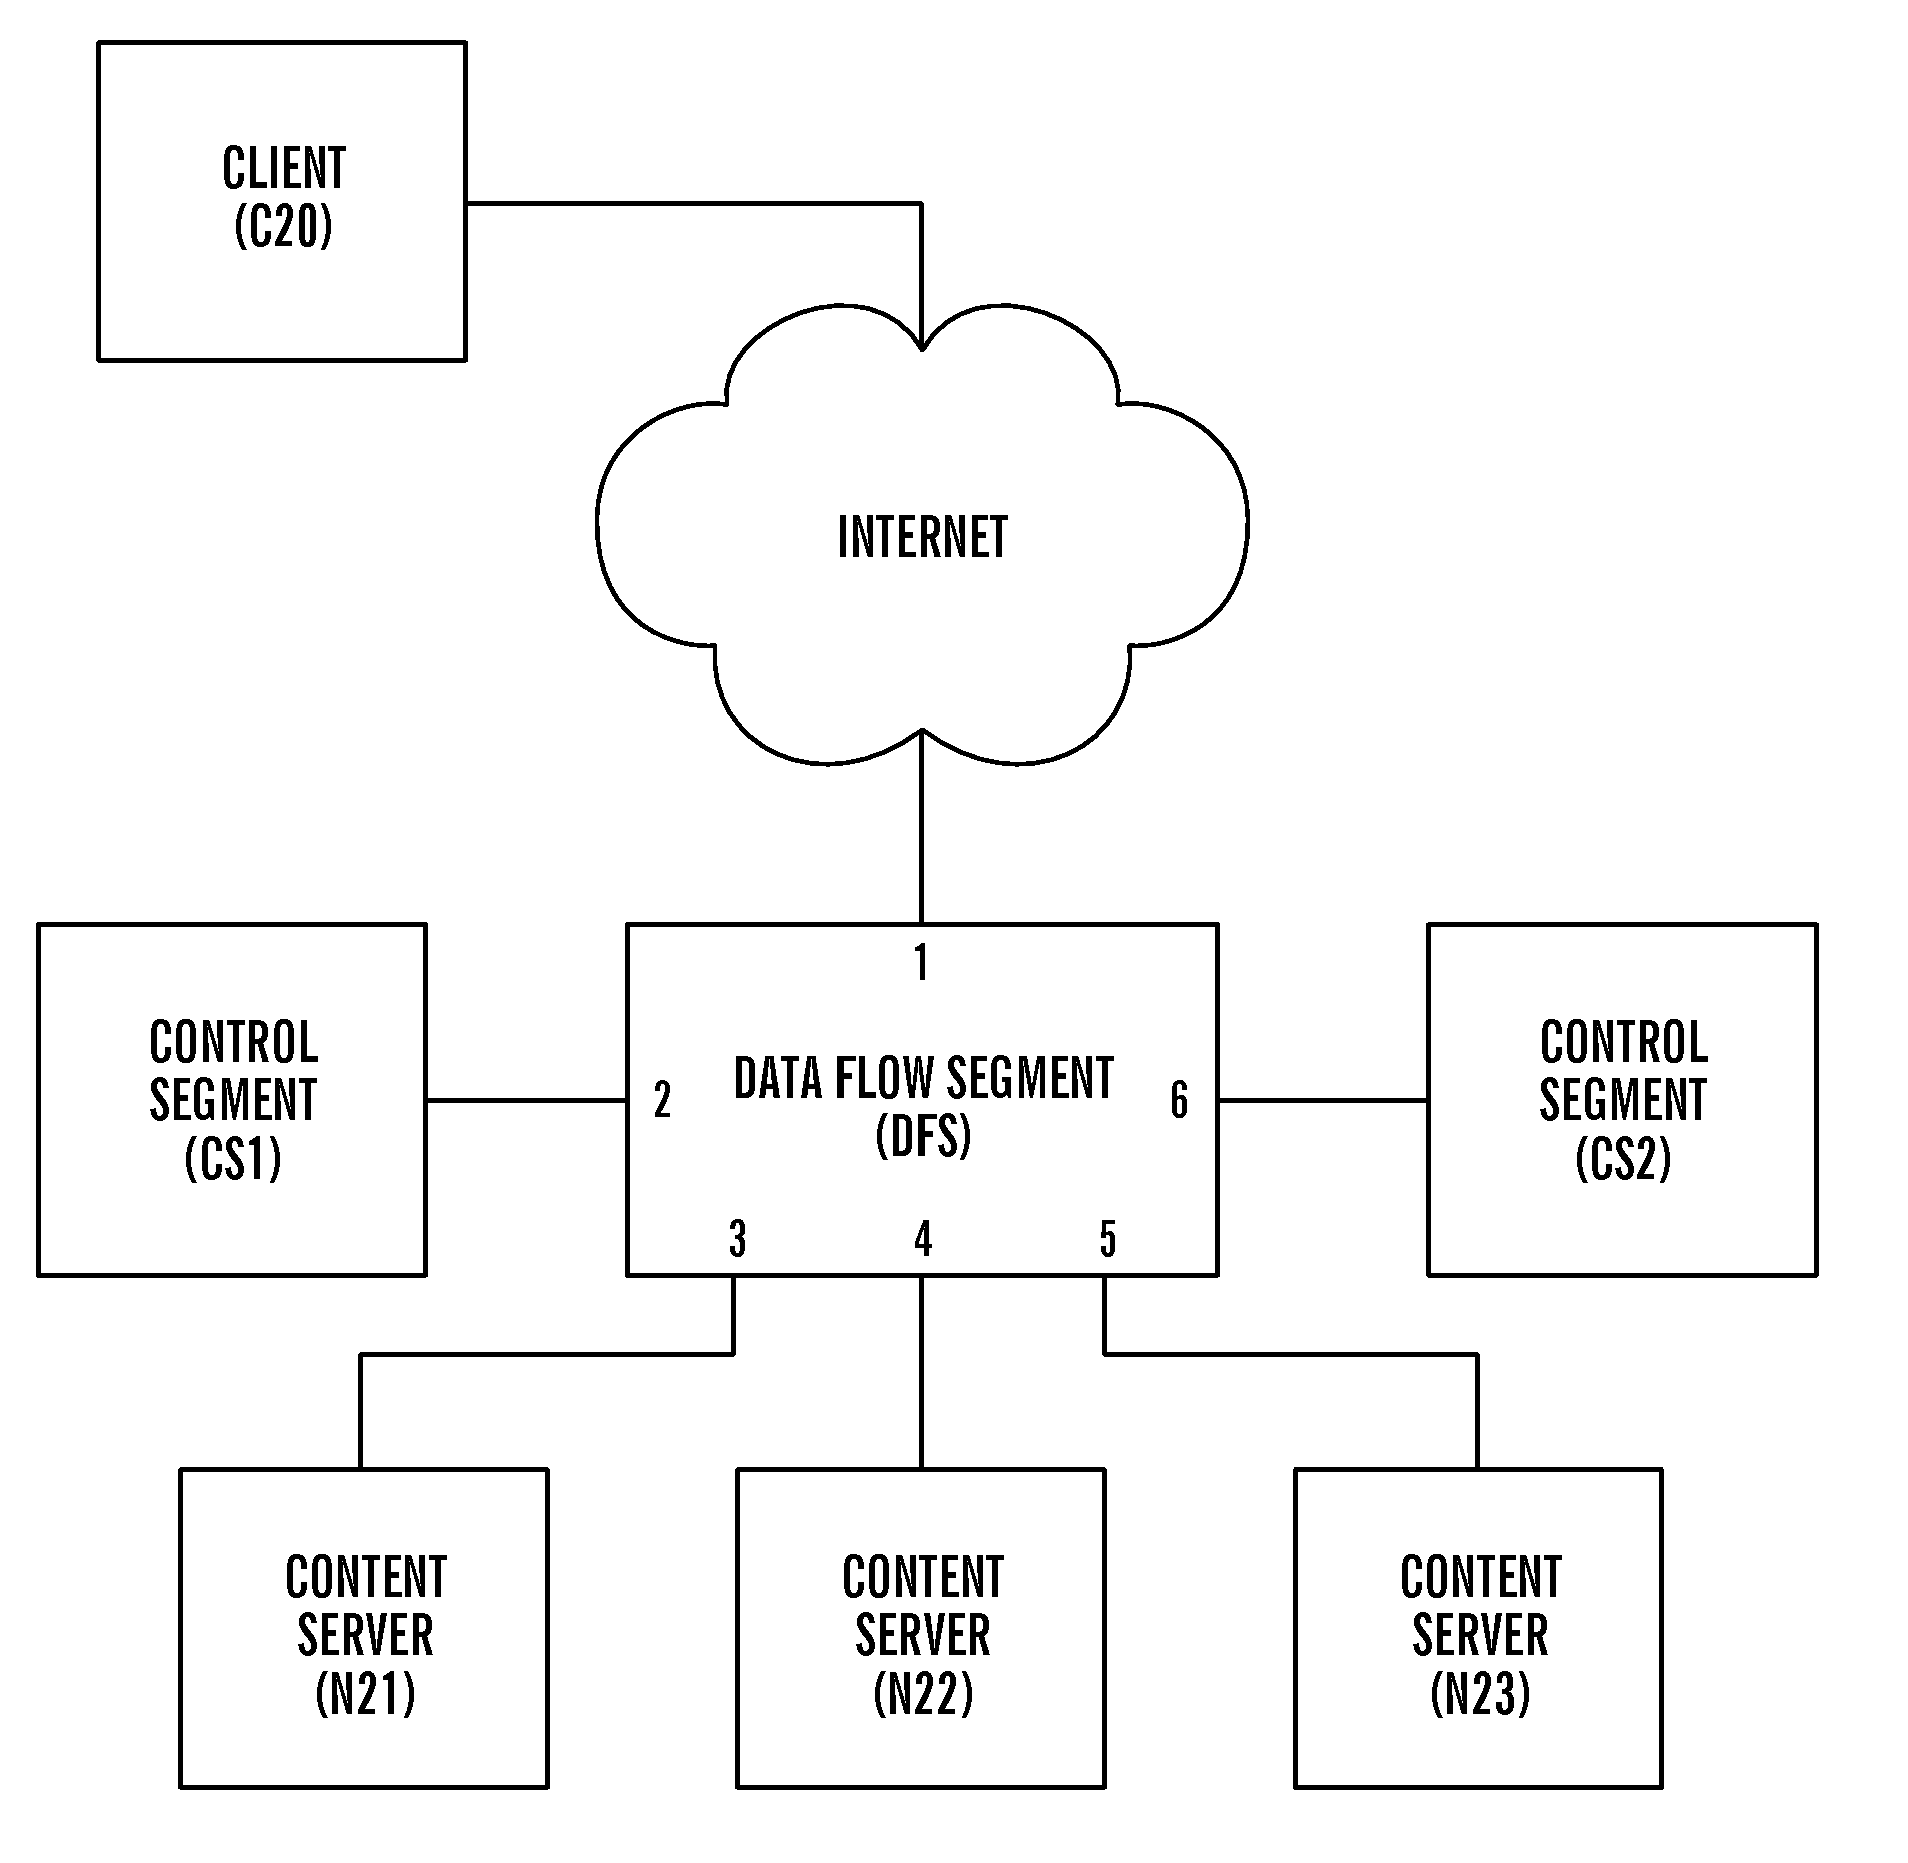 Simplified method for processing multiple connections from the same client